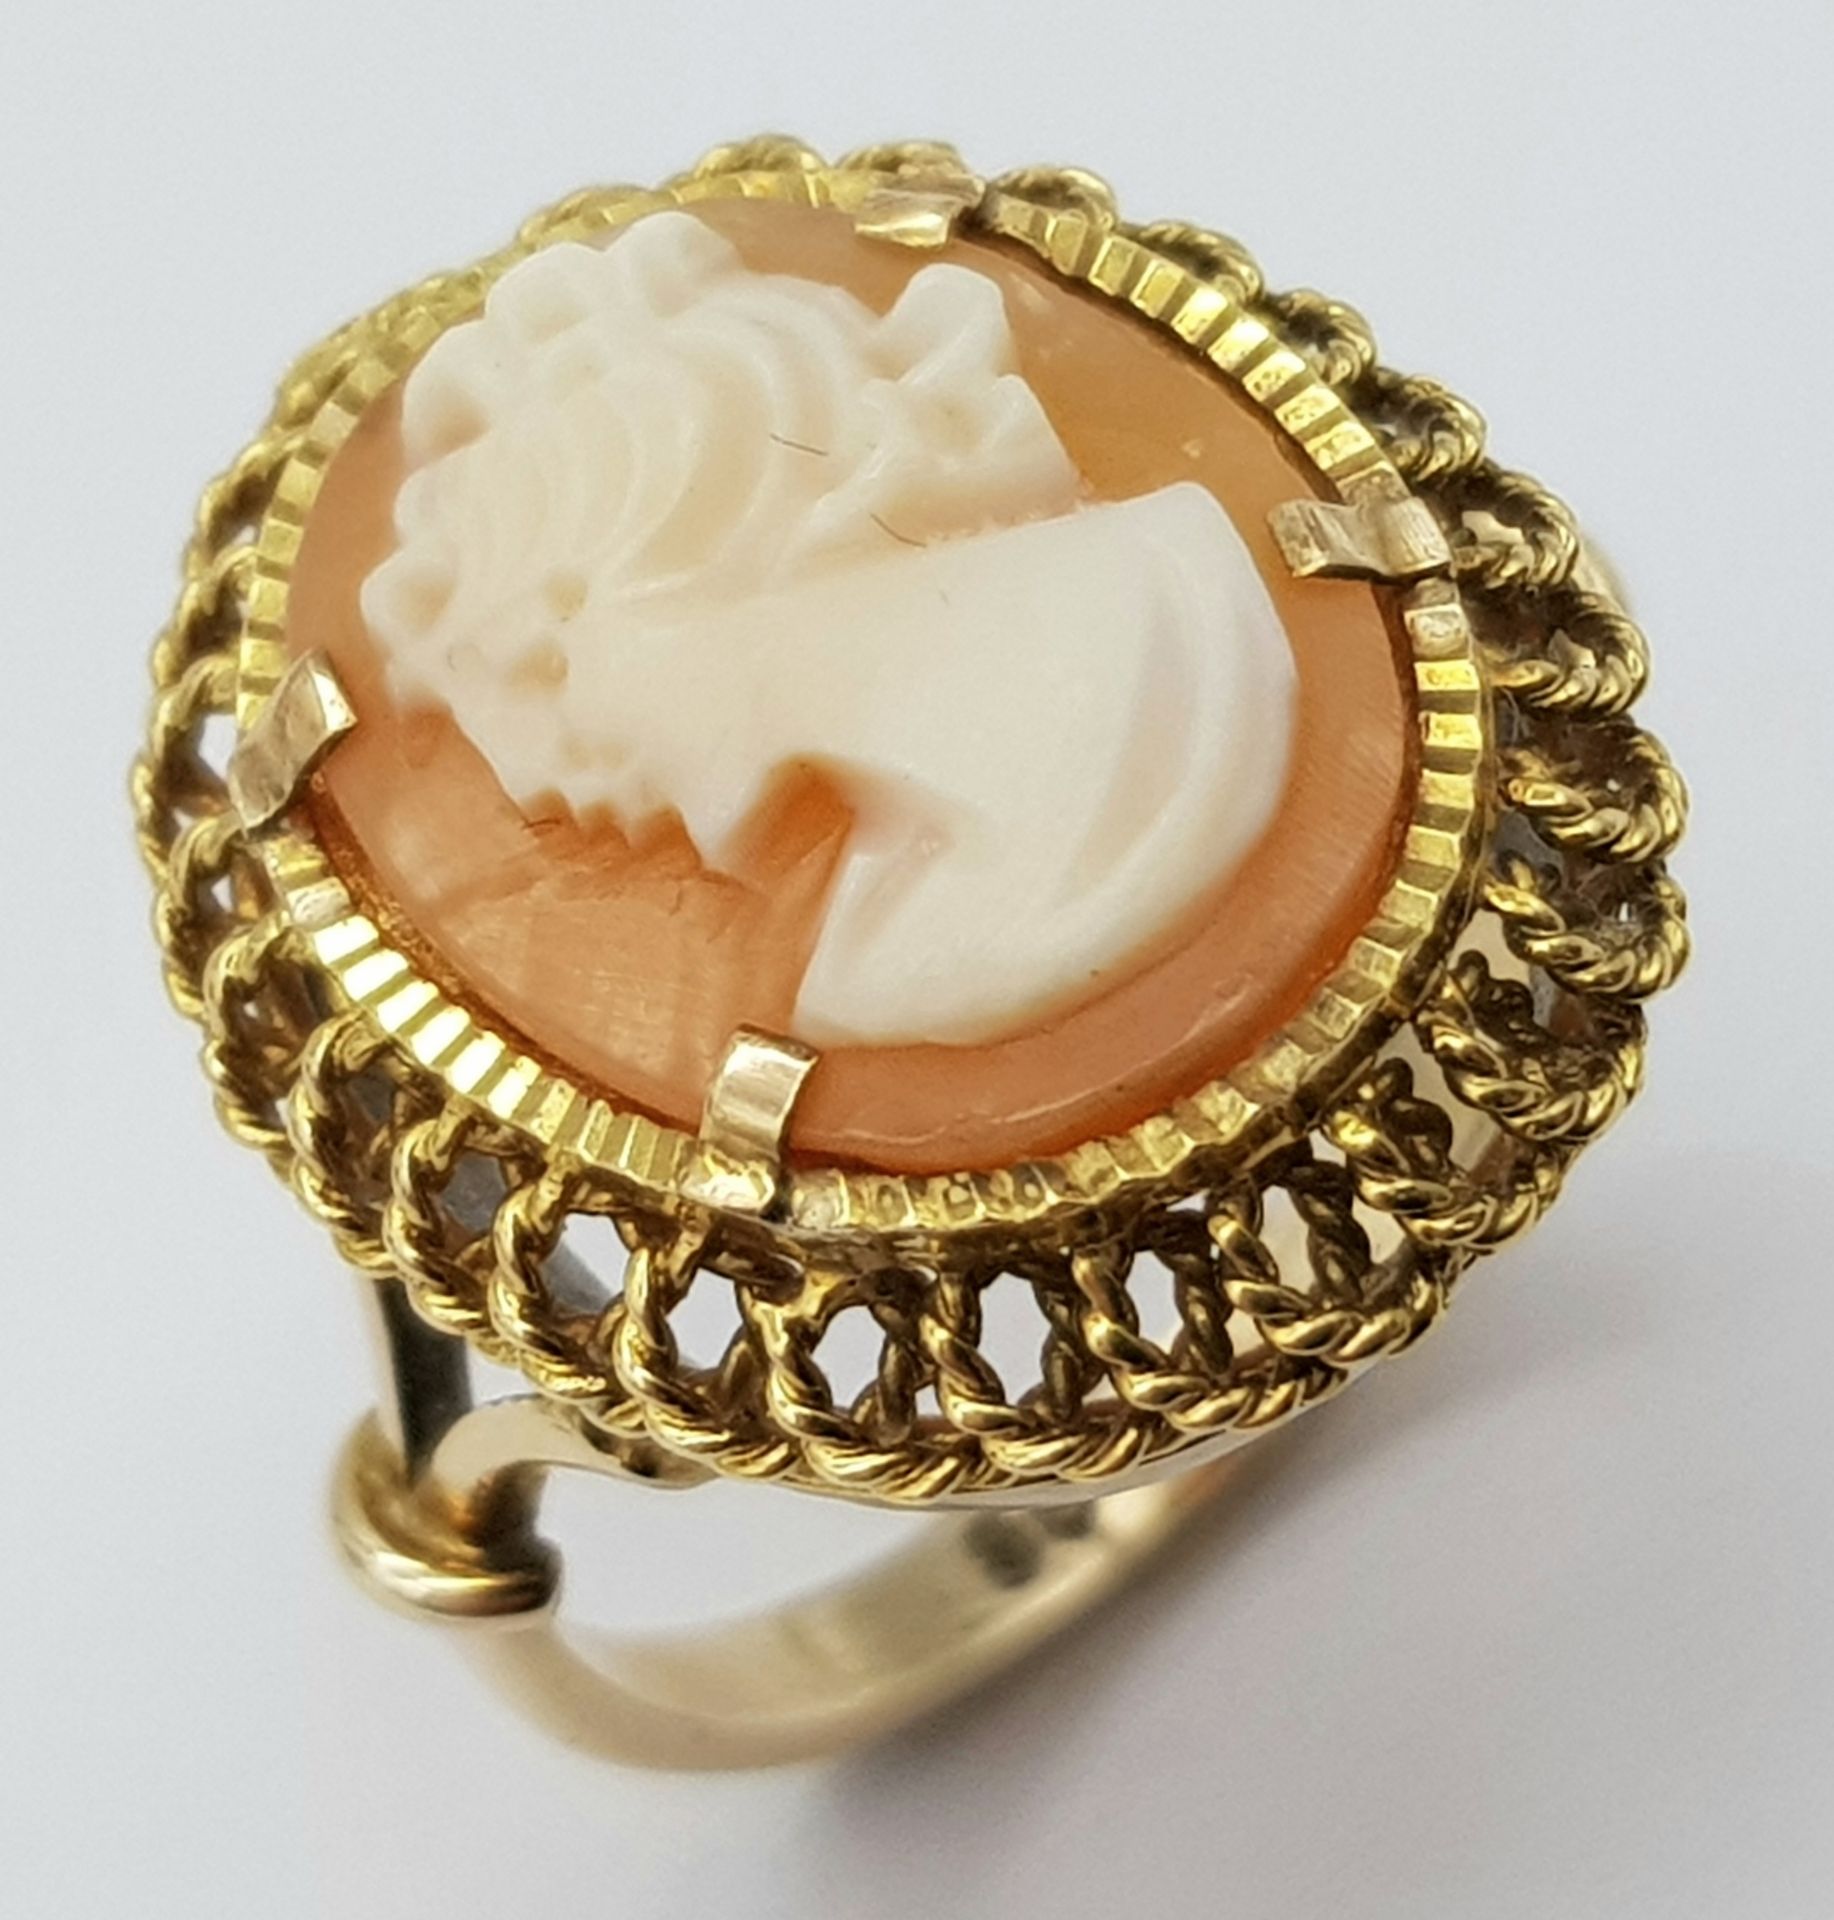 A Vintage 9K Yellow Gold Cameo Ring. Size P. 6.1g total weight.